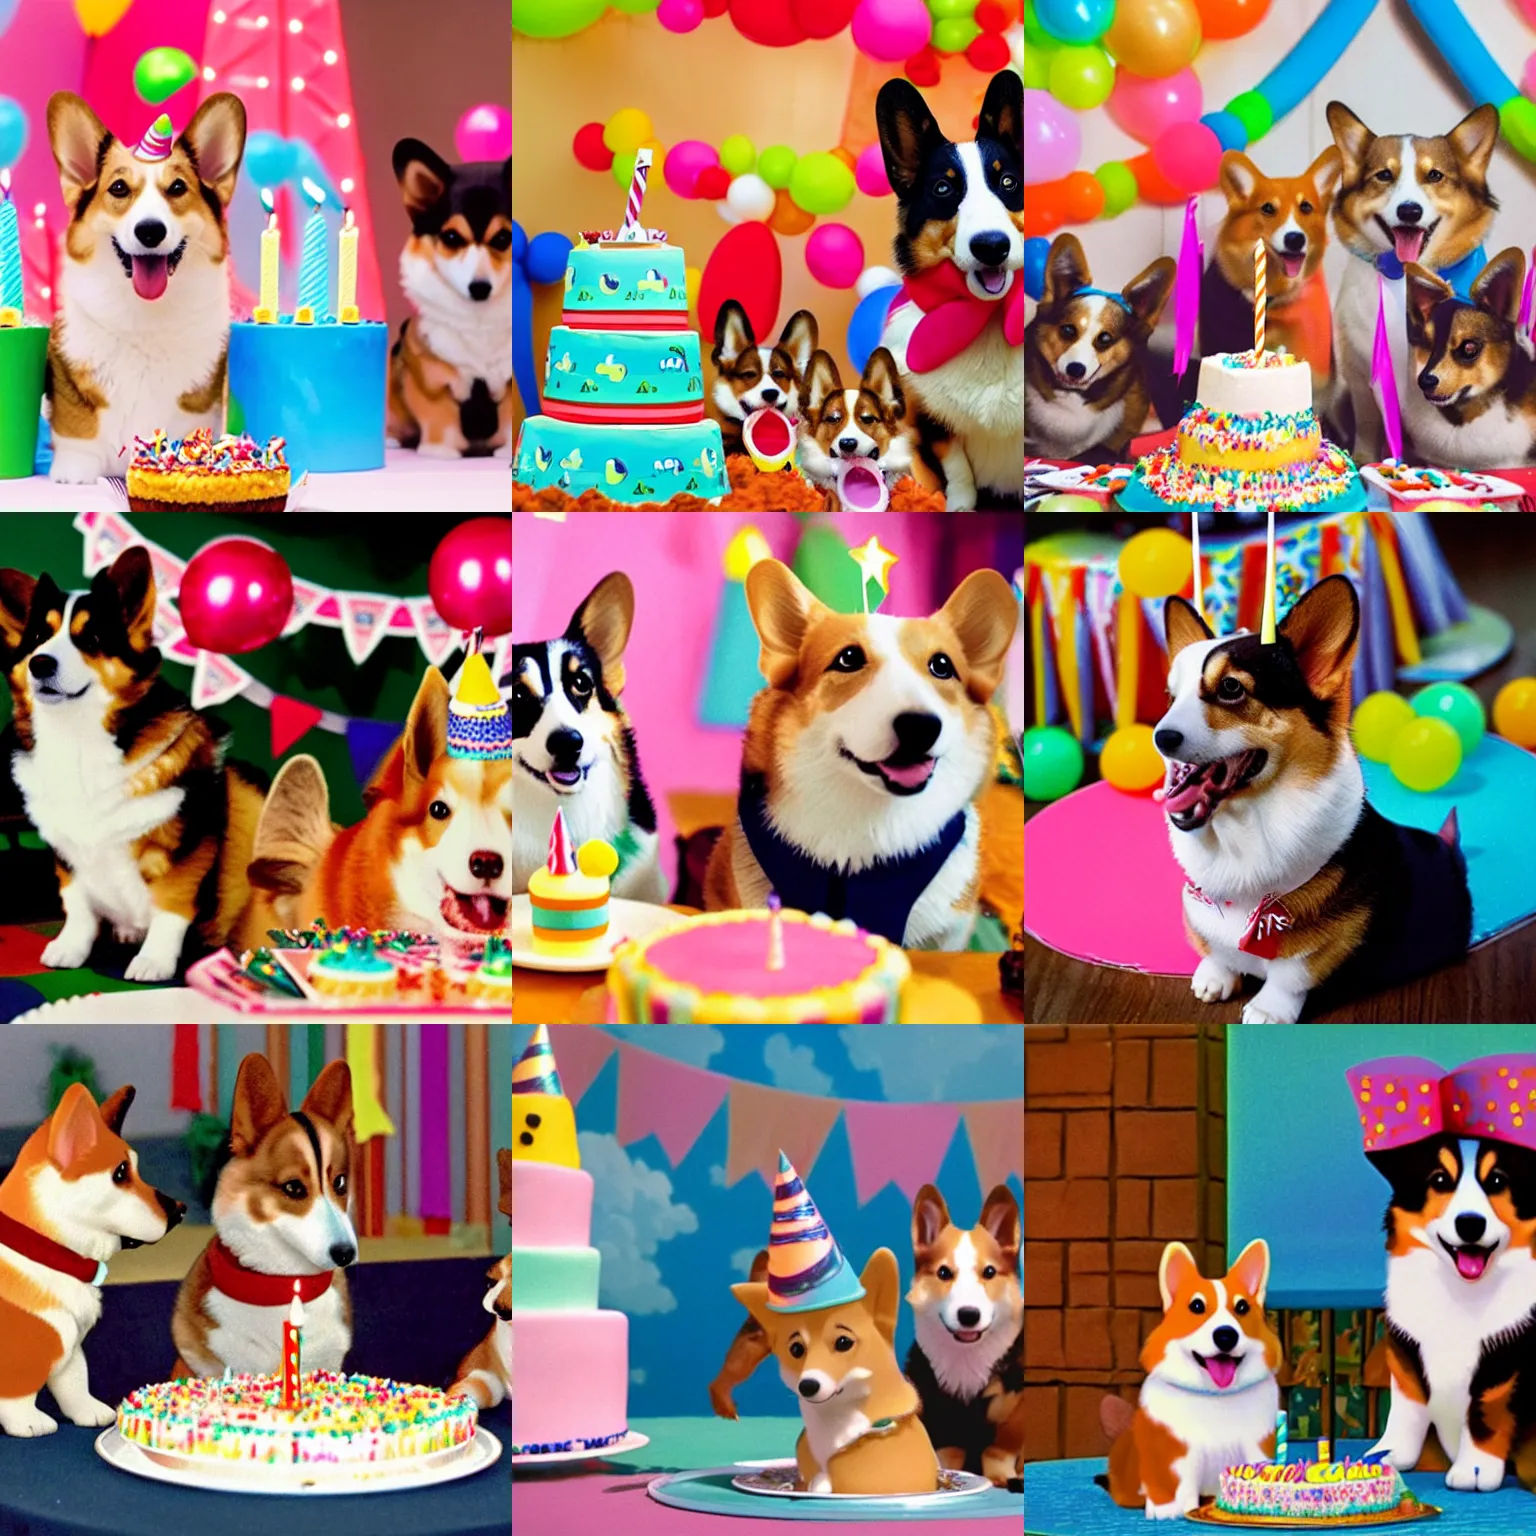 Prompt: film still of corgis at a birthday party, in front of a colorful birthday cake, by studio ghibli, festive, classy